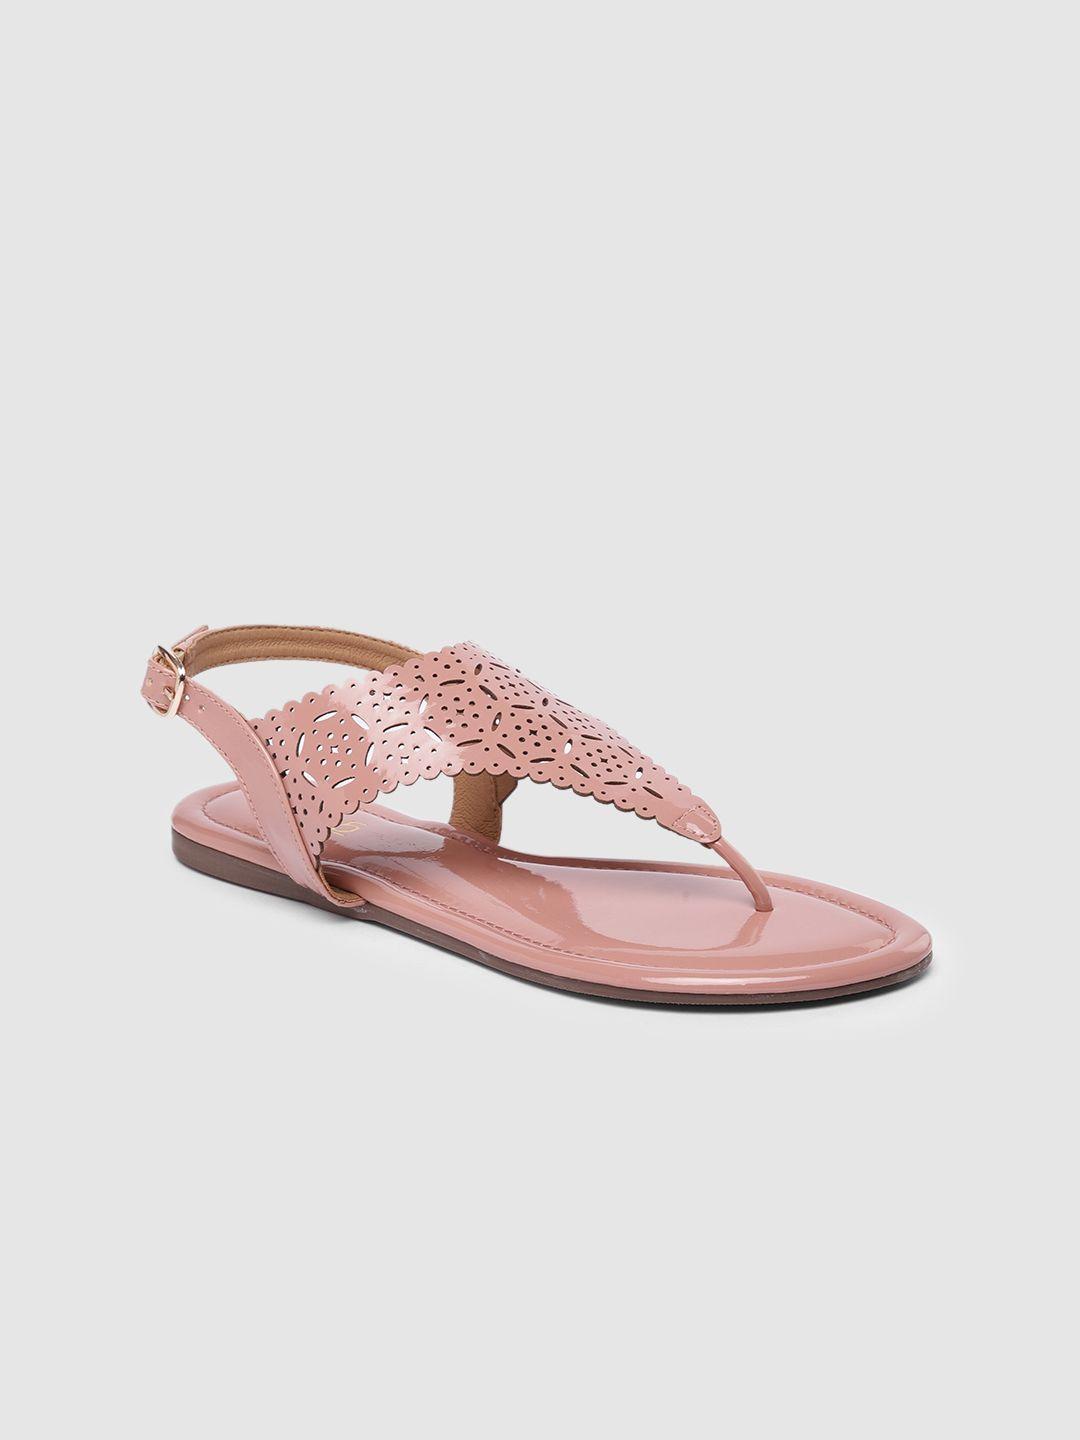 inc-5-women-peach-coloured-t-strap-flats-with-laser-cuts